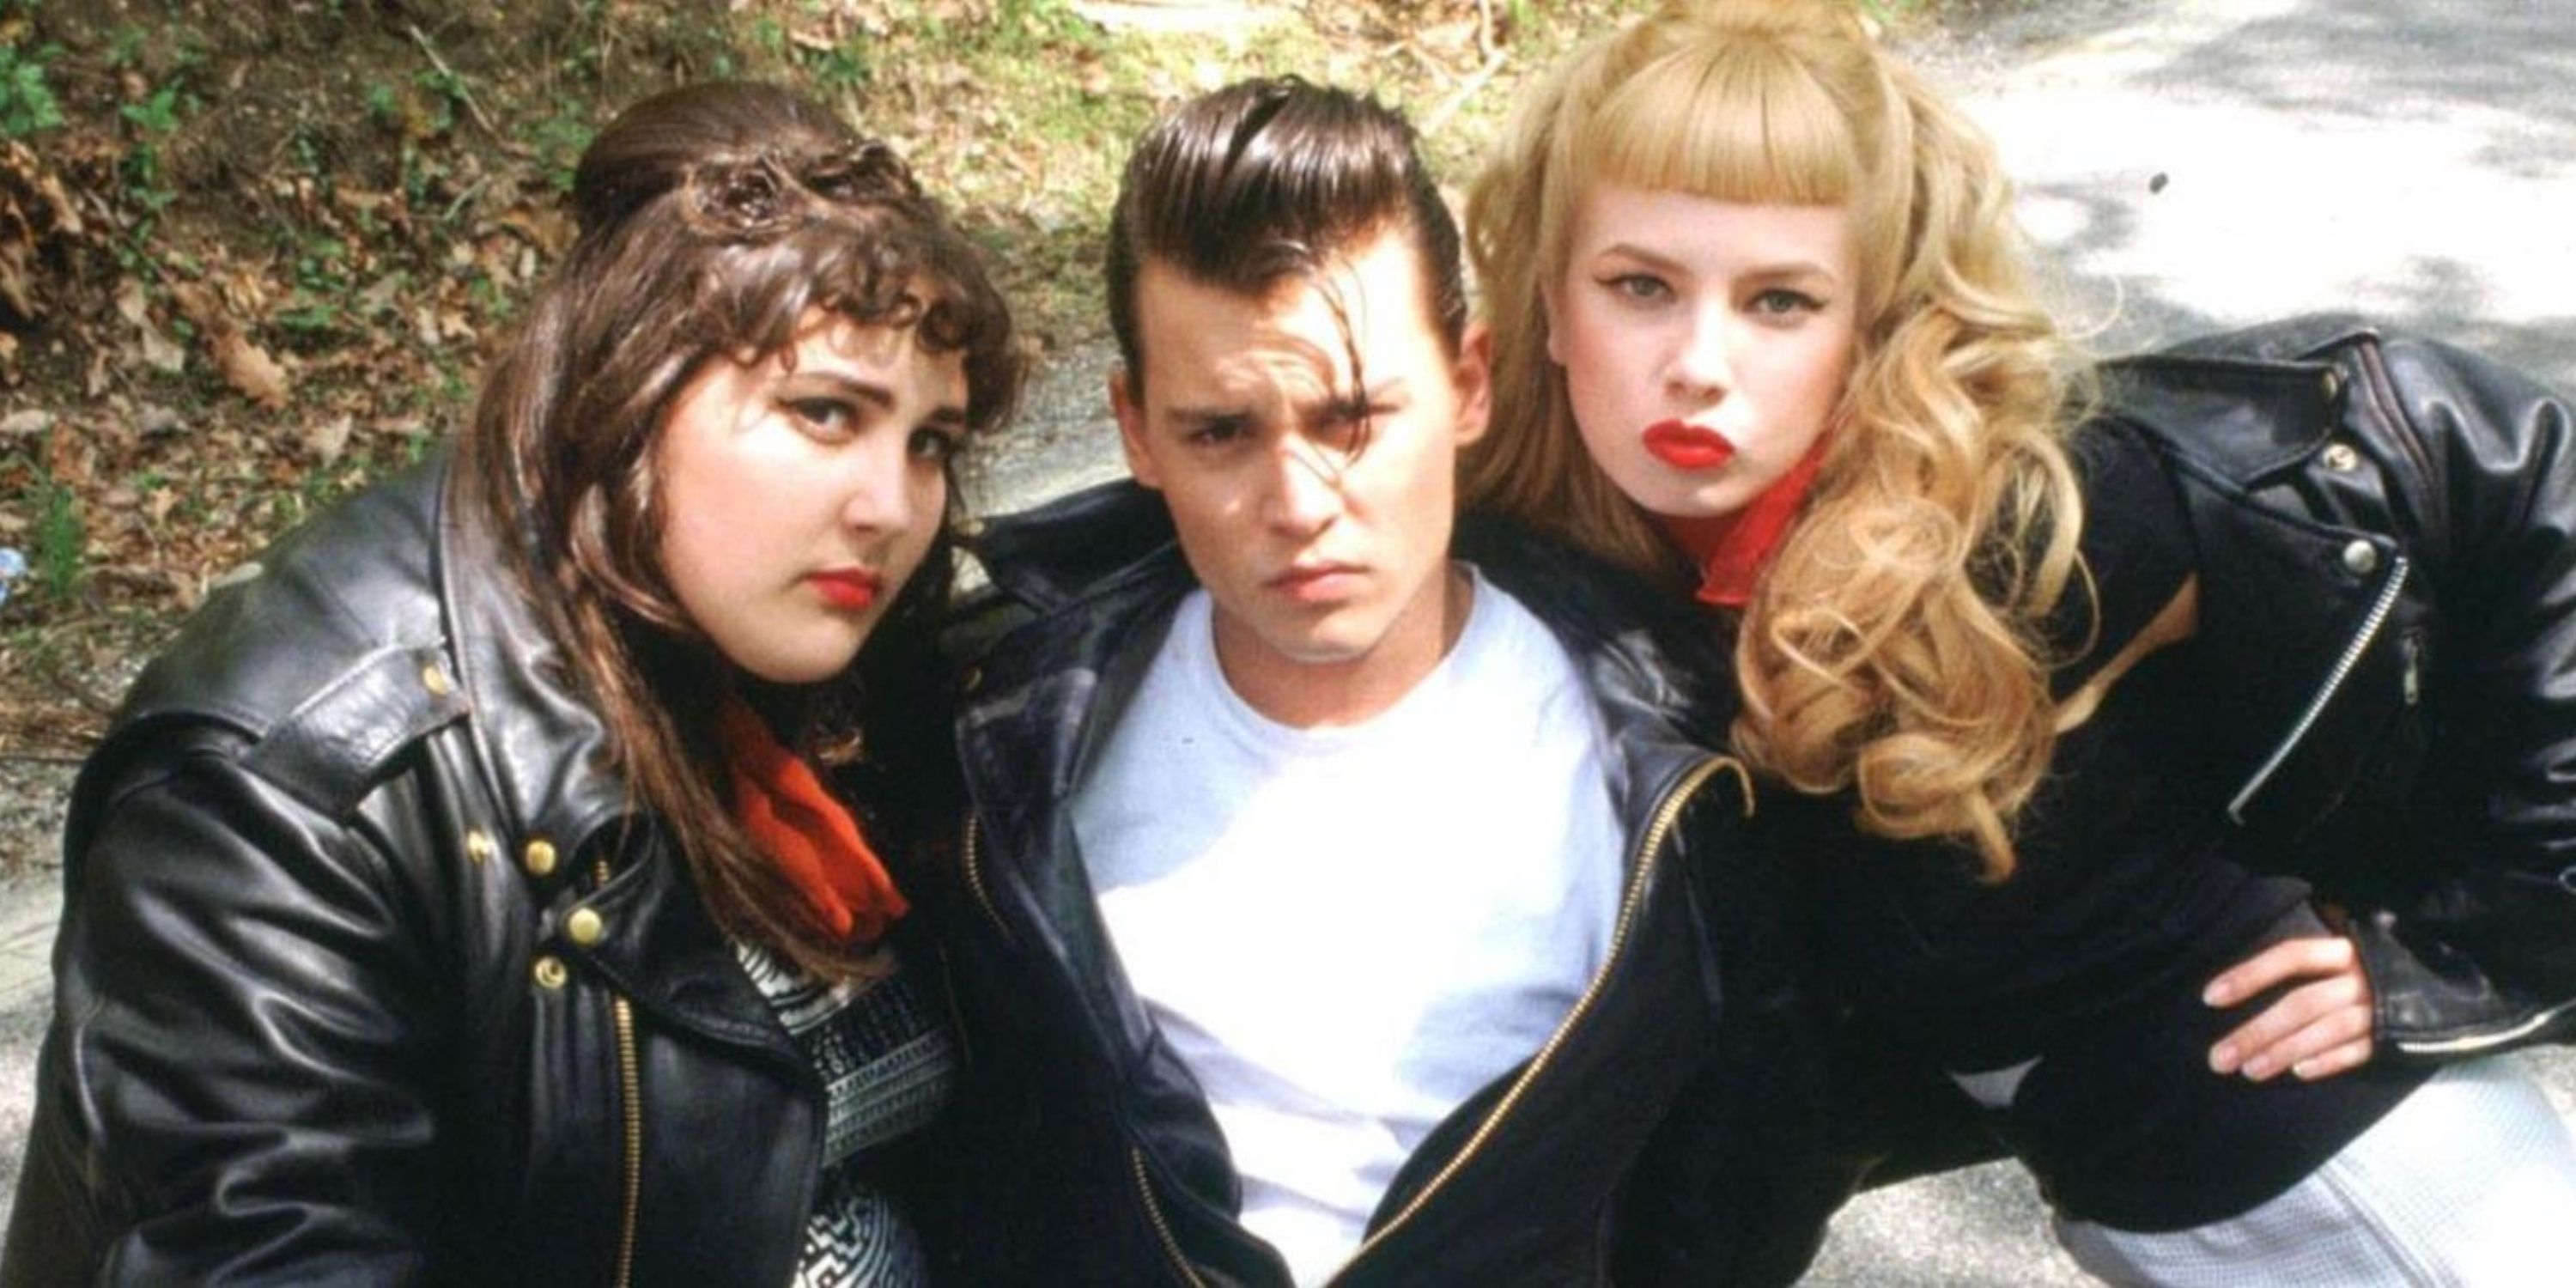 Ricki Lake, Johnny Depp & Traci Lords wear leather jackets & pose for the camera in Cry-Baby